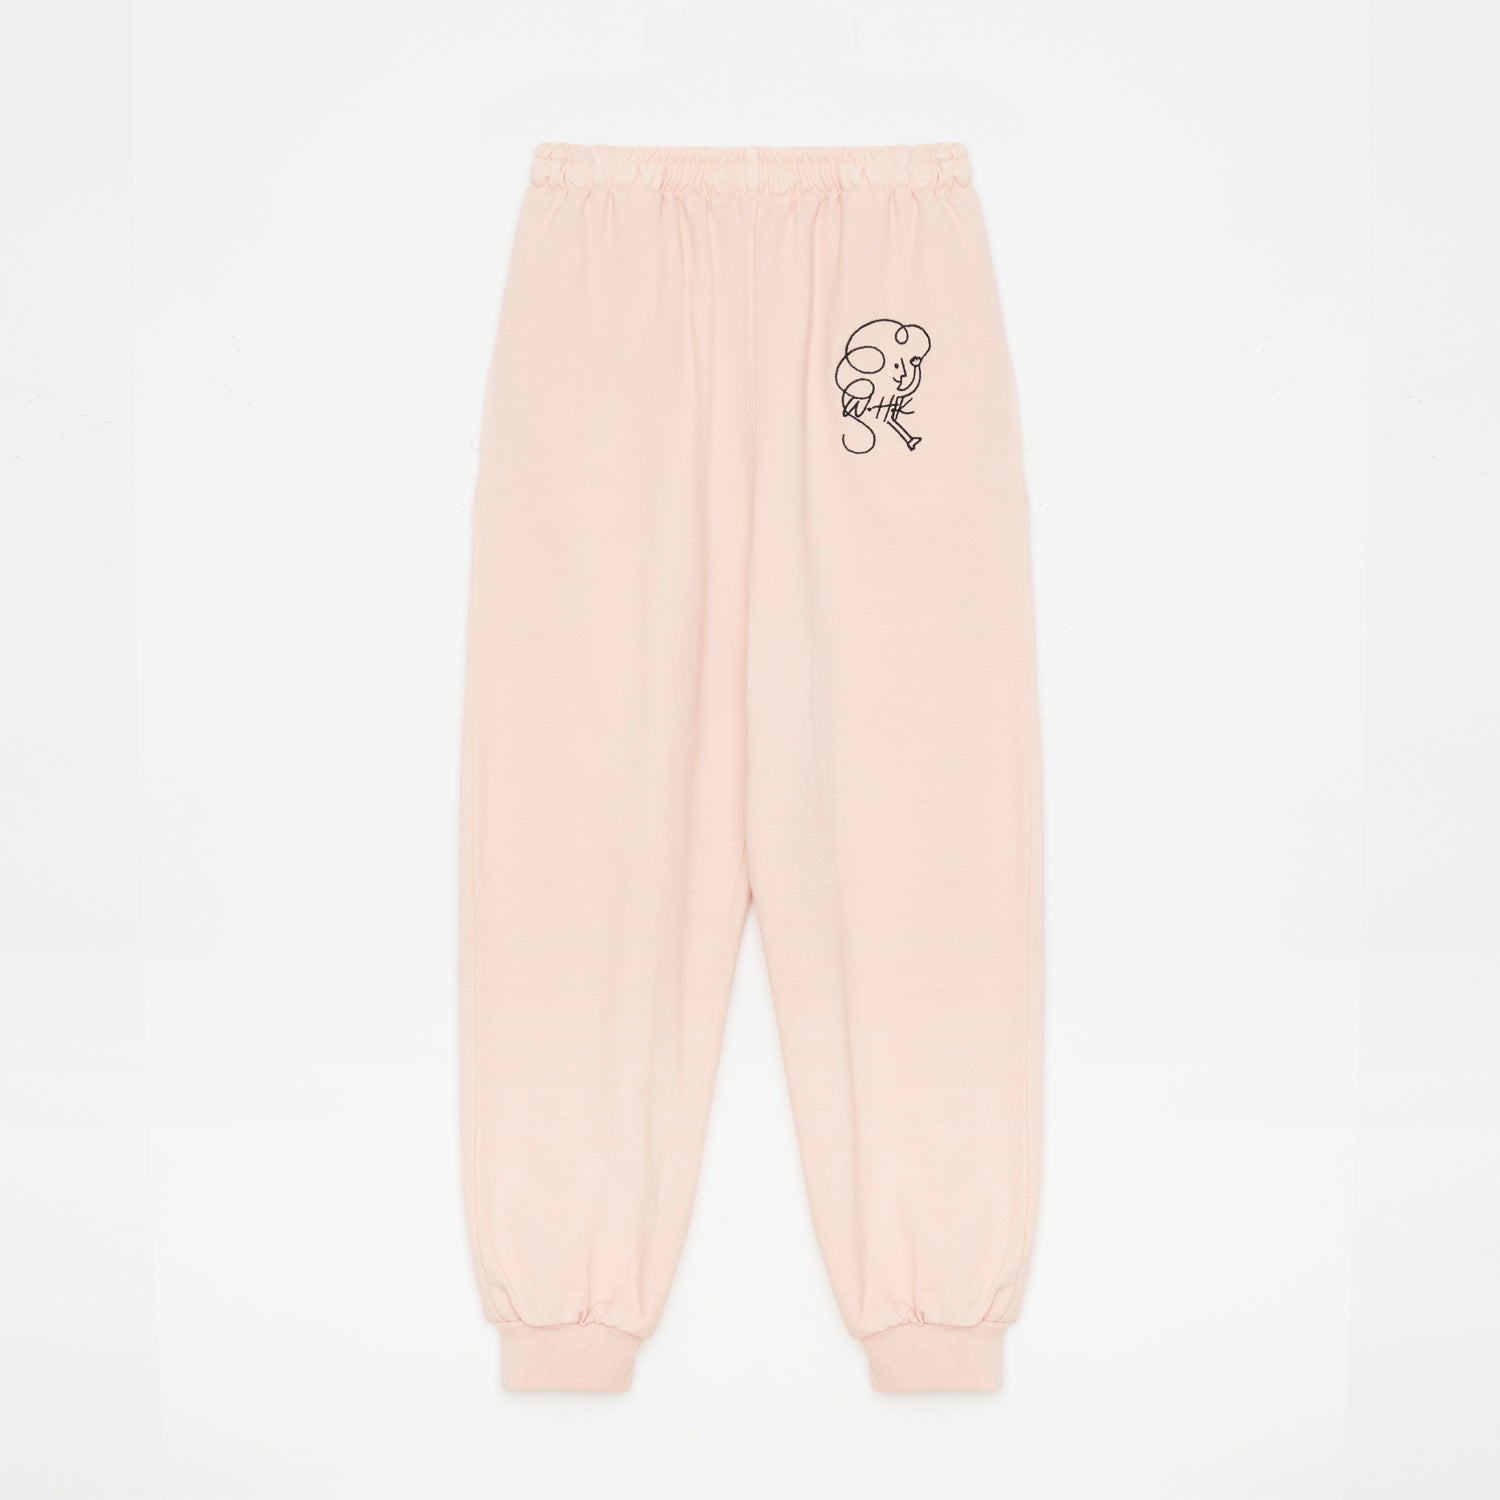 Boys & Girls Pink Cotton Trousers